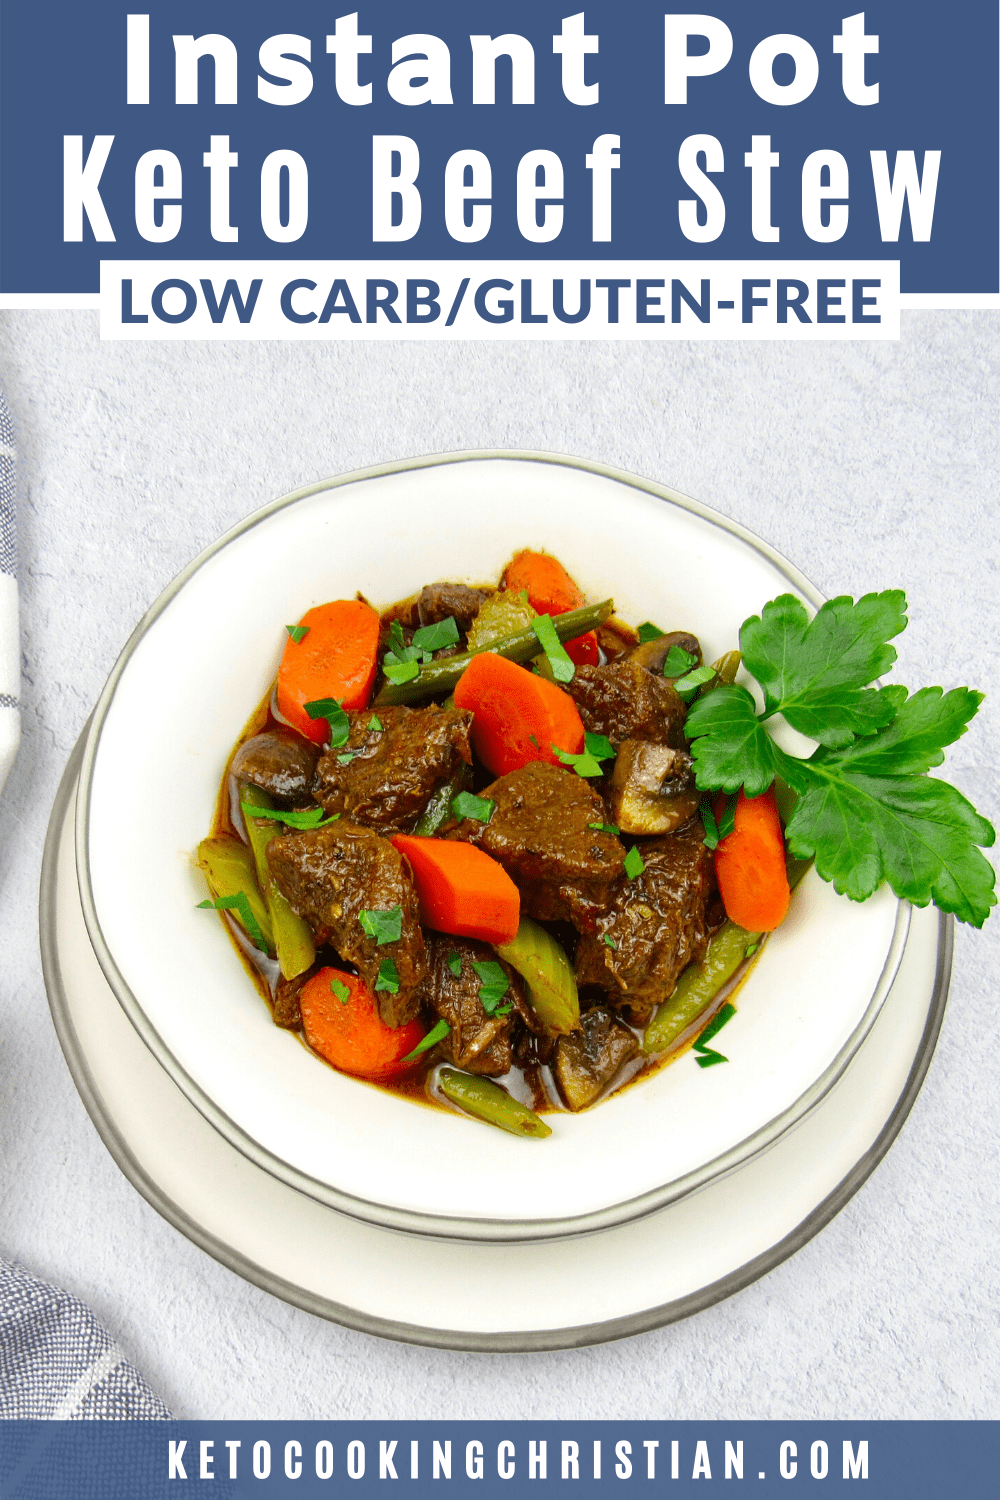 PIN Keto Instant Pot Beef Stew